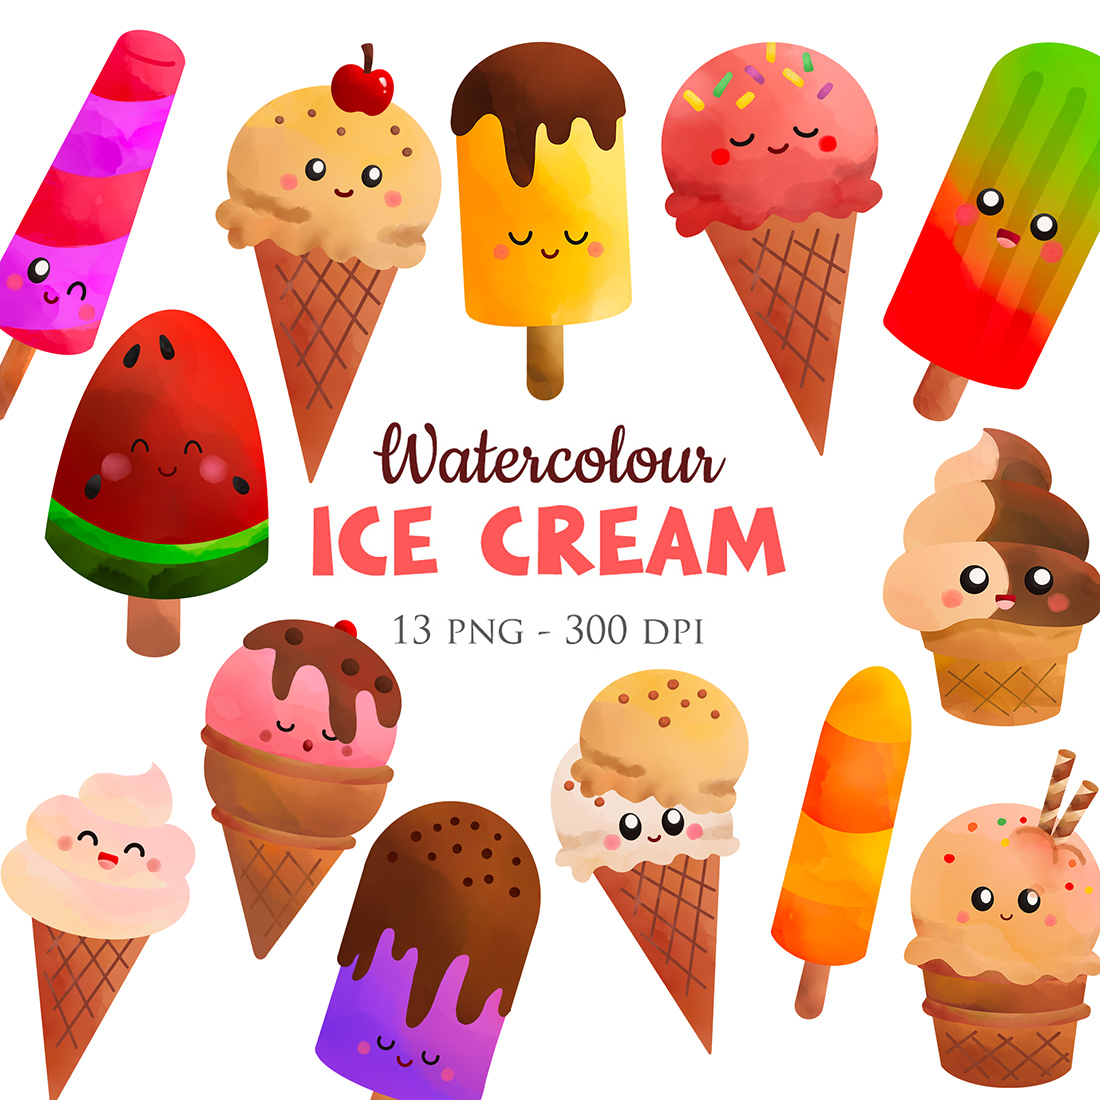 Cute Colorful Watercolour Ice Cream Cone Scoop Dessert Snack Flavored Chocolate Strawberry Fruits Lollipop Illustration Vector Clipart Cartoon cover image.